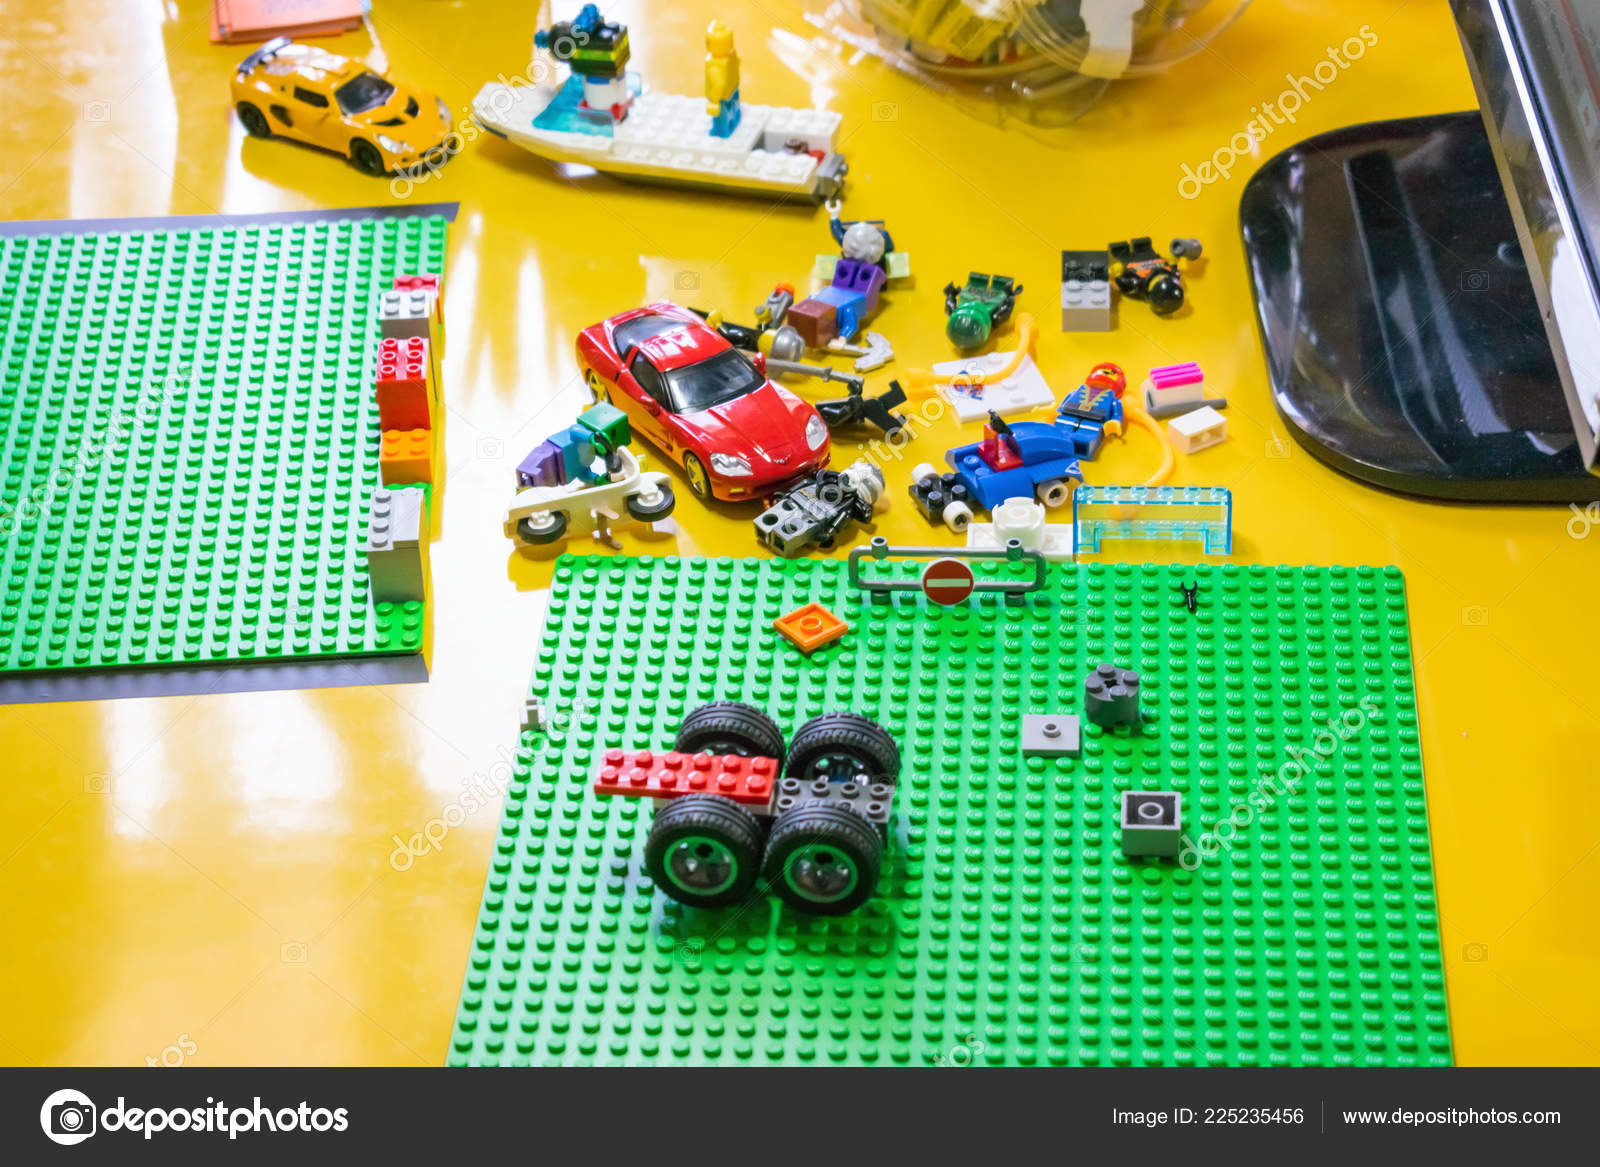 Stop Motion Animation Process Lego Details Toy Cars Reating Video – Stock  Editorial Photo © Irrmago #225235456